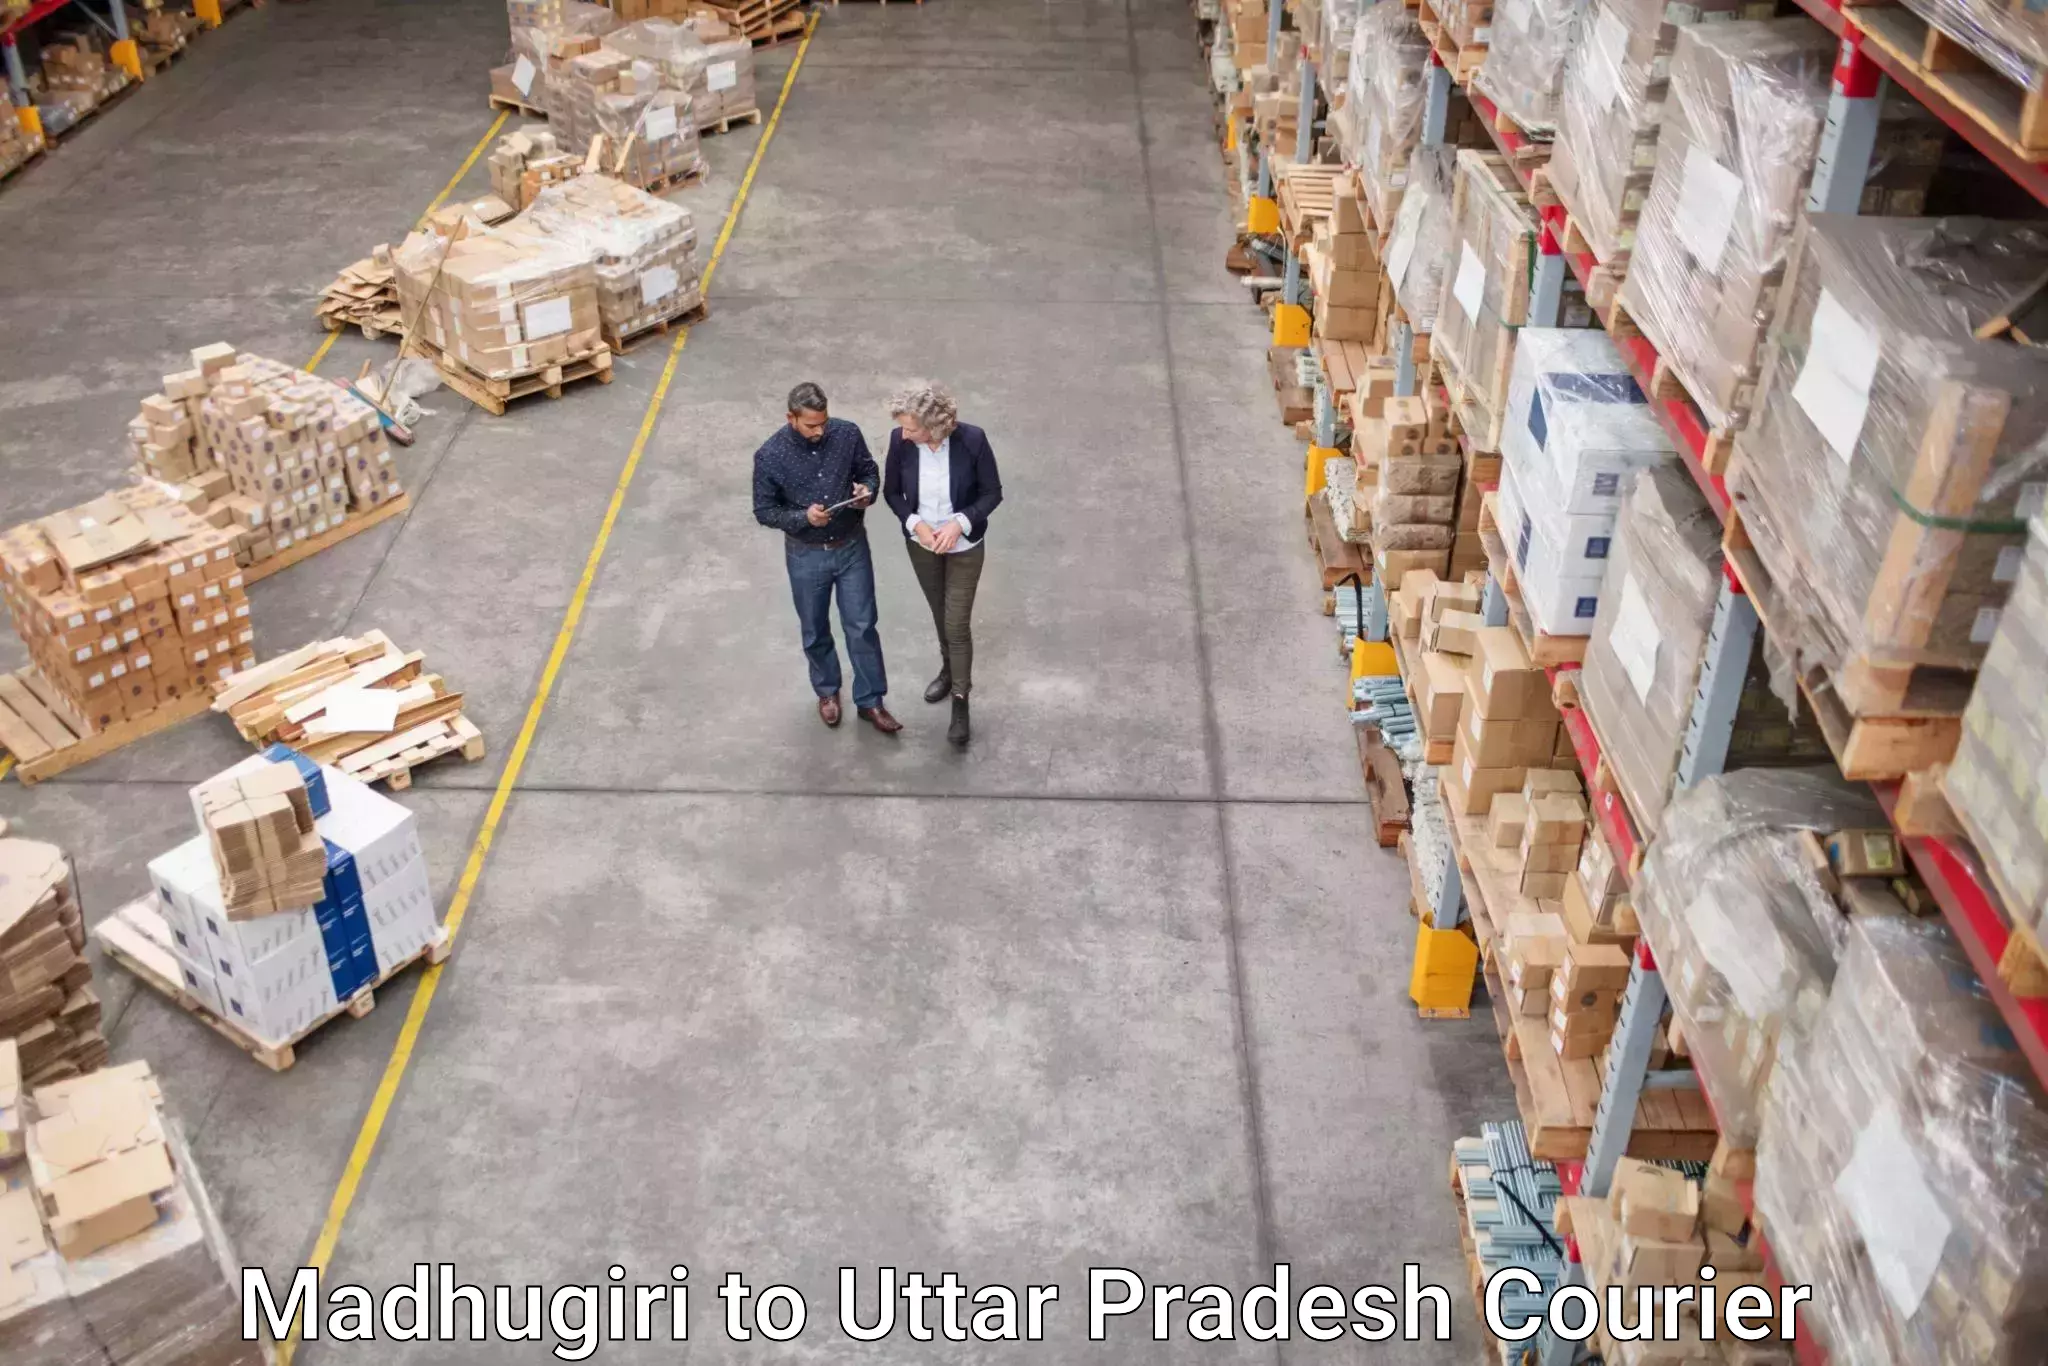 Reliable courier service Madhugiri to Agra